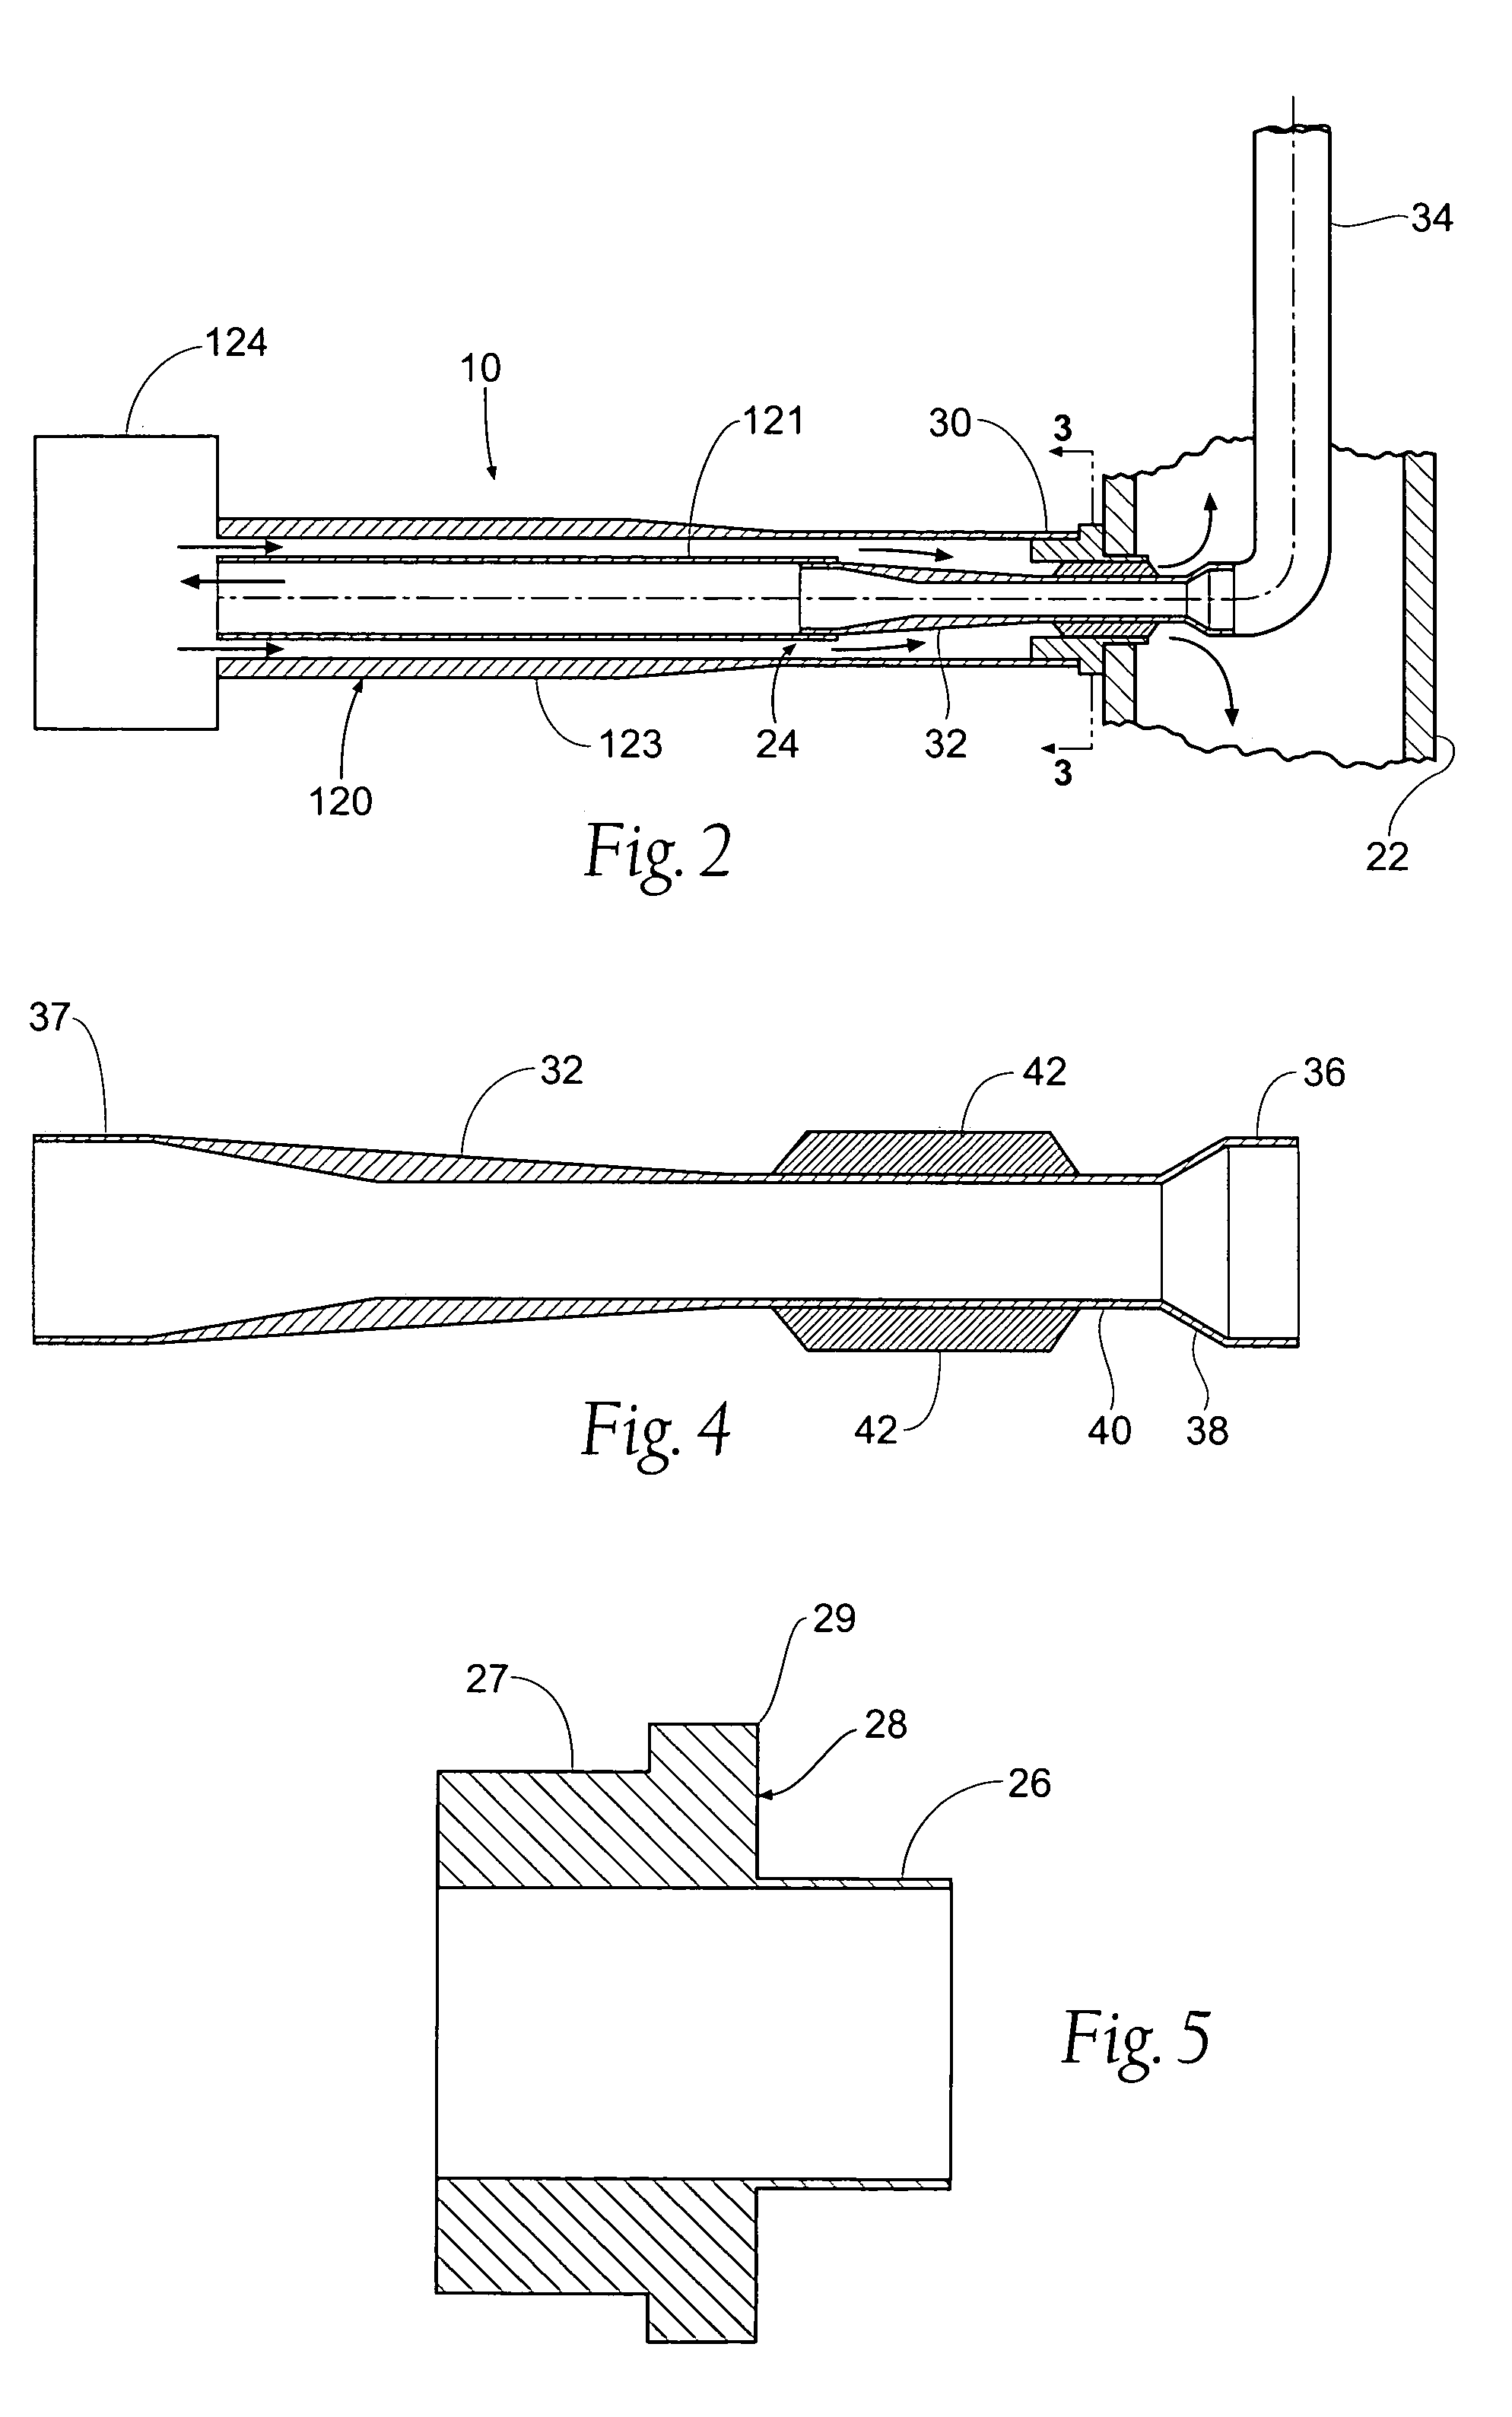 Apparatus and methods for entering cavities of the body